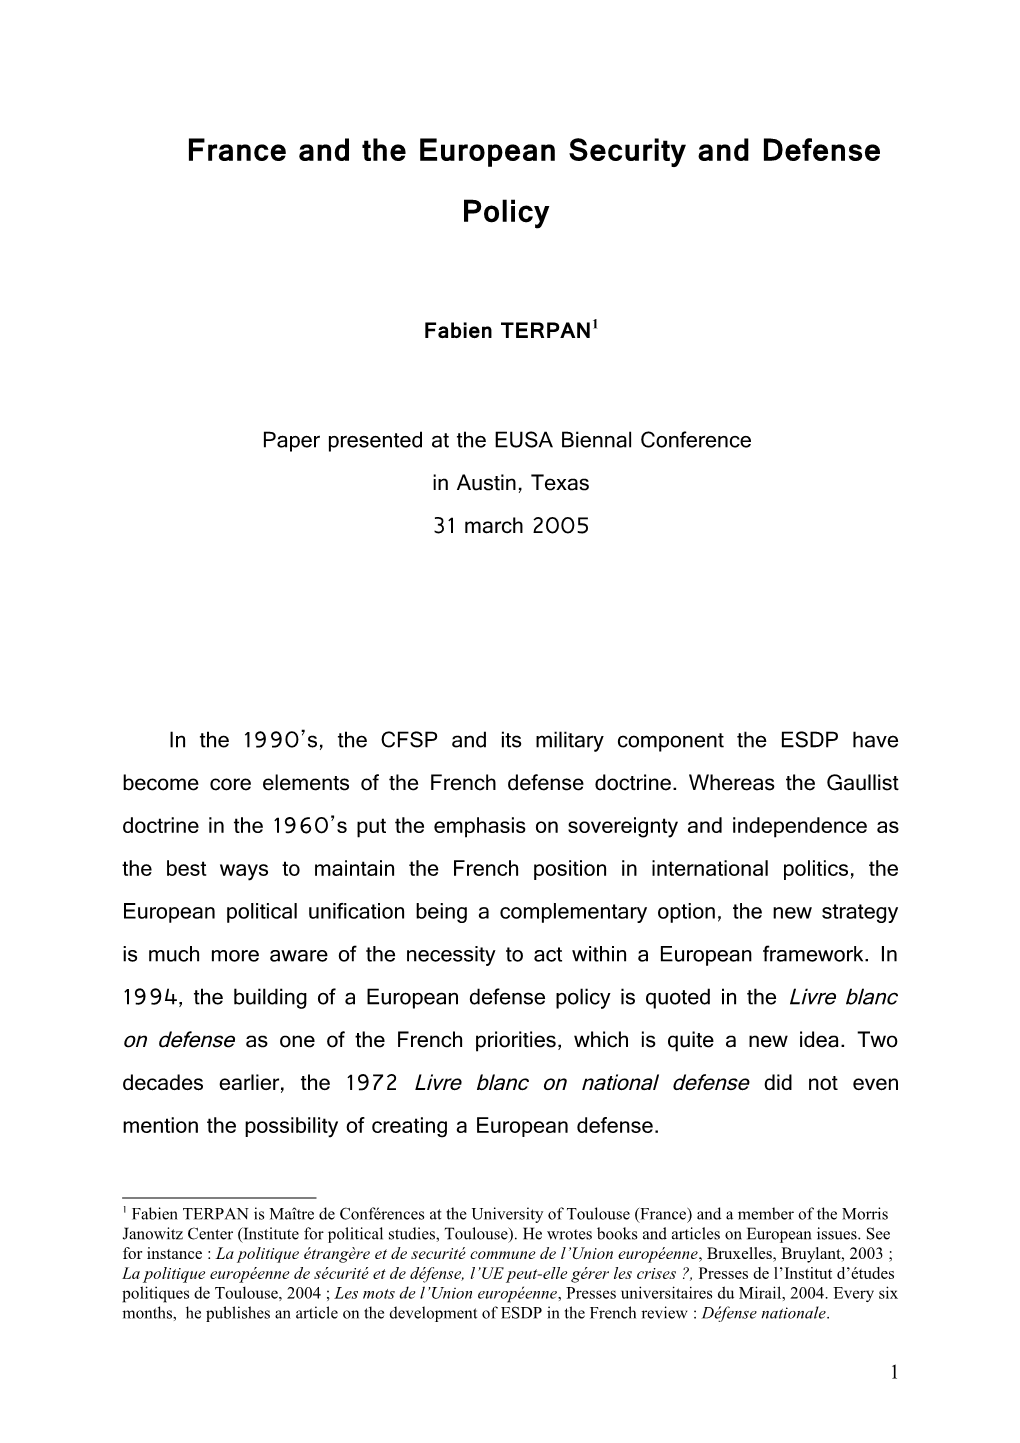 France and the European Security and Defense Policy